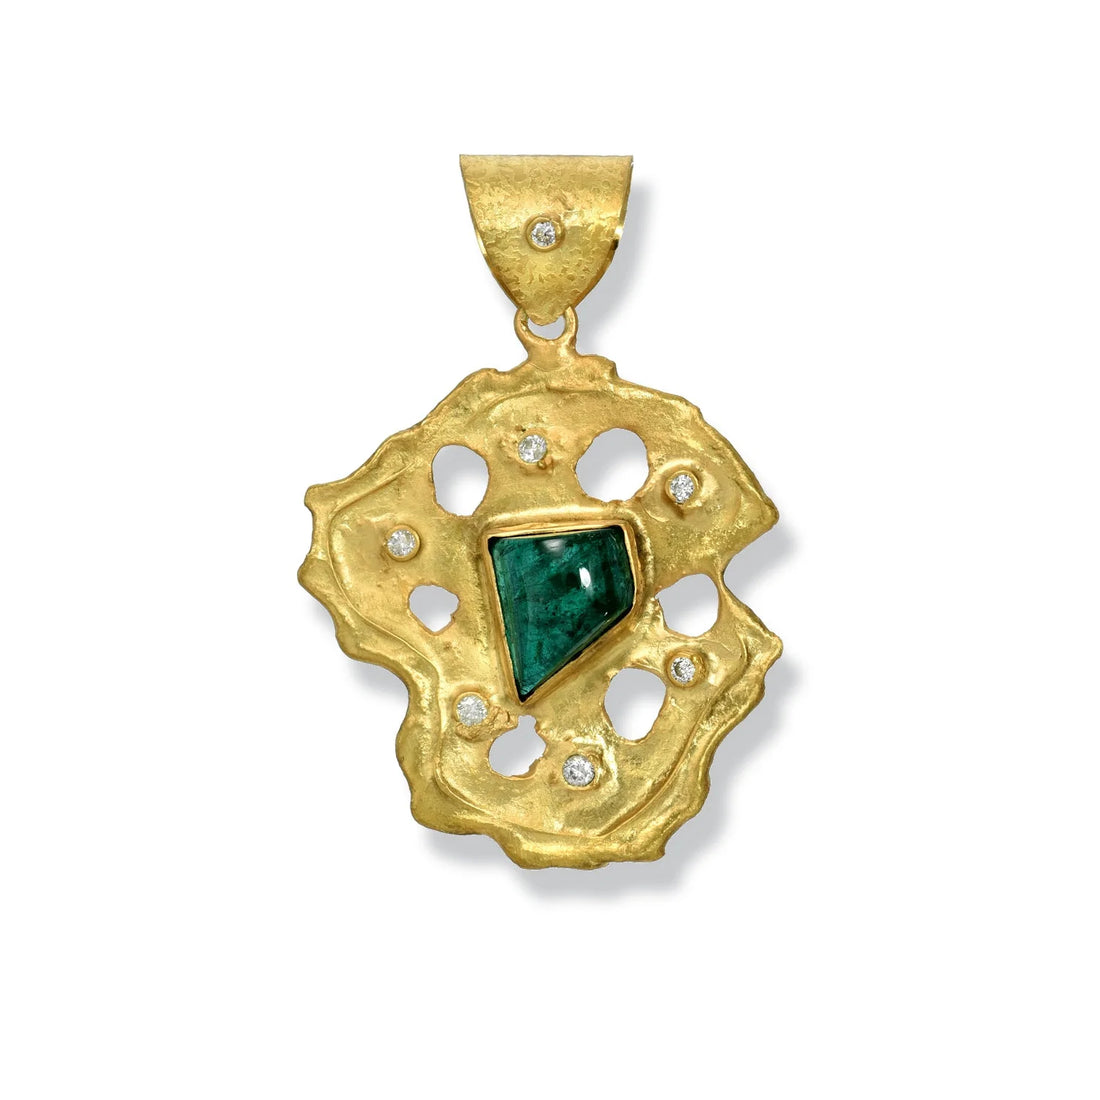 What is the spiritual significance of emerald?